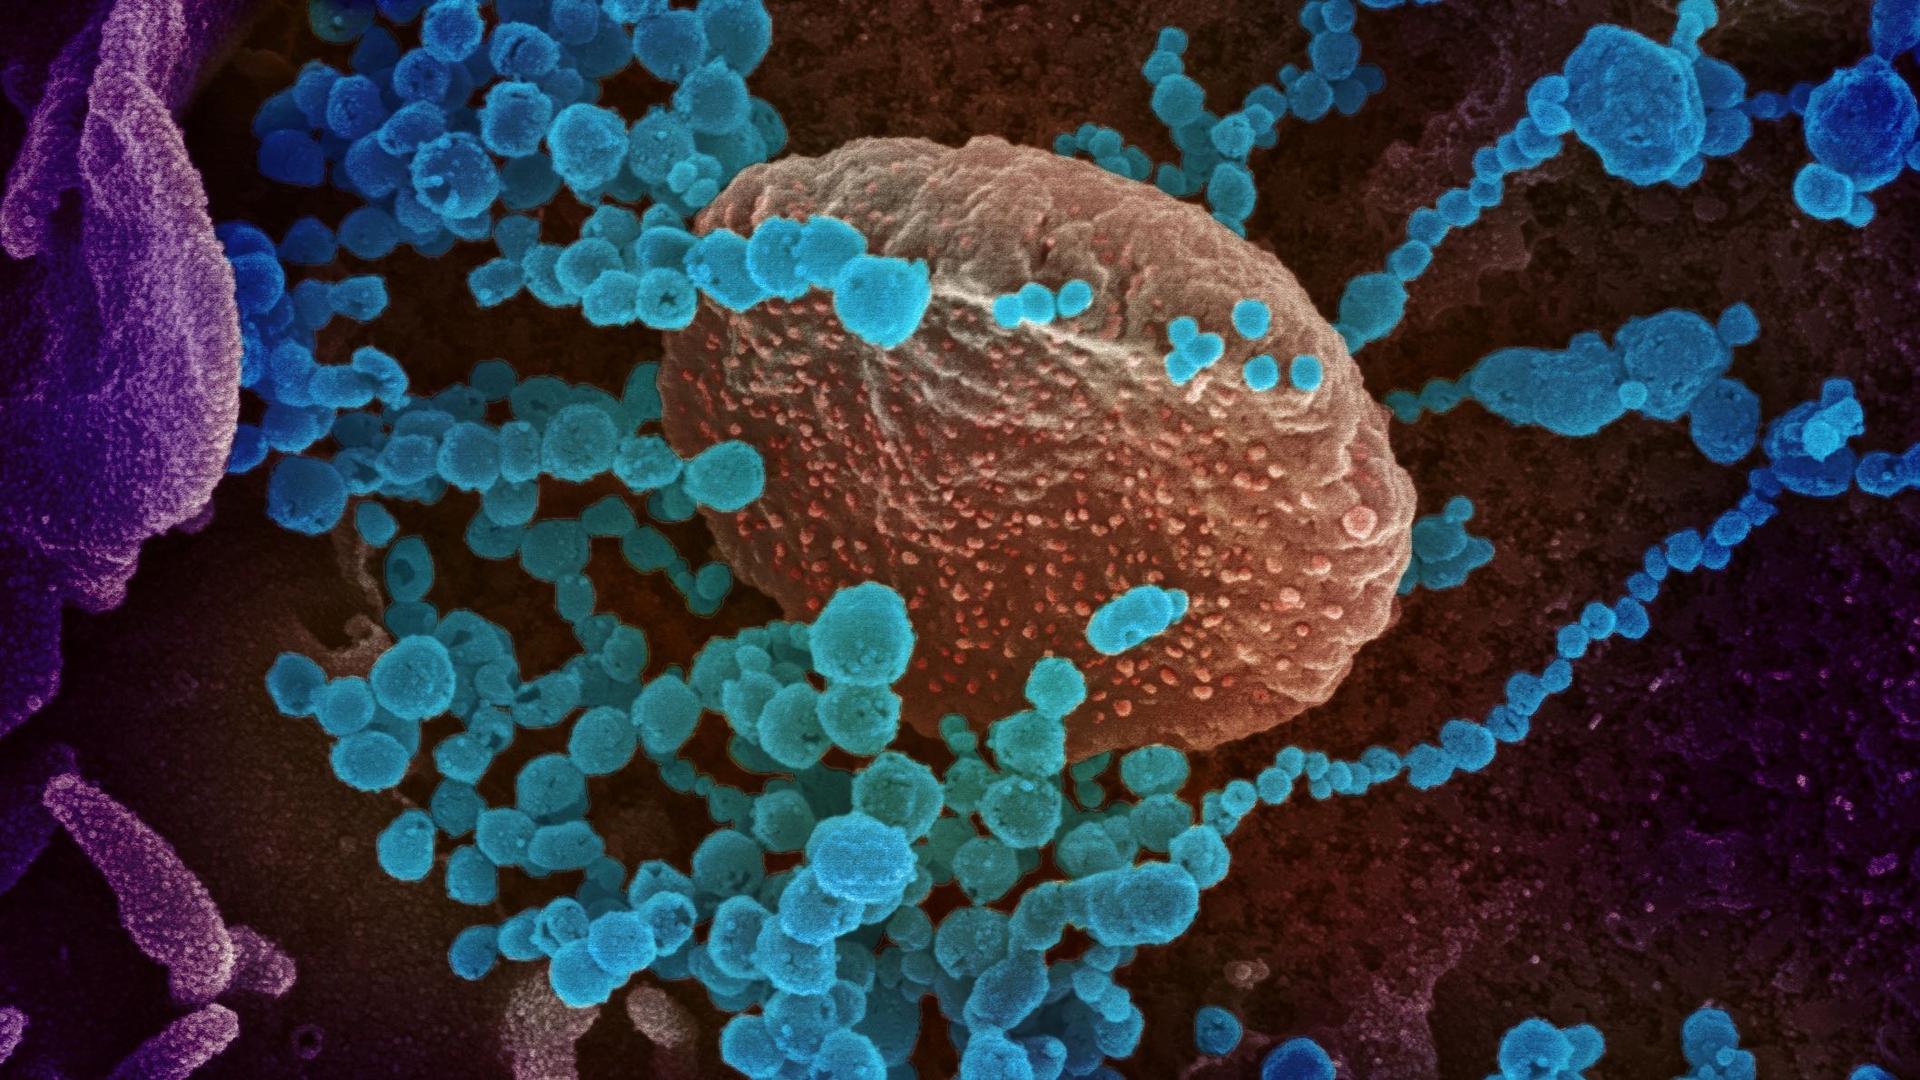 This scanning electron microscope image shows SARS-CoV-2 (round blue objects), also known as the novel coronavirus, the virus that causes COVID-19, emerging from the surface of cells cultured in the lab which was isolated from a patient in the US. 